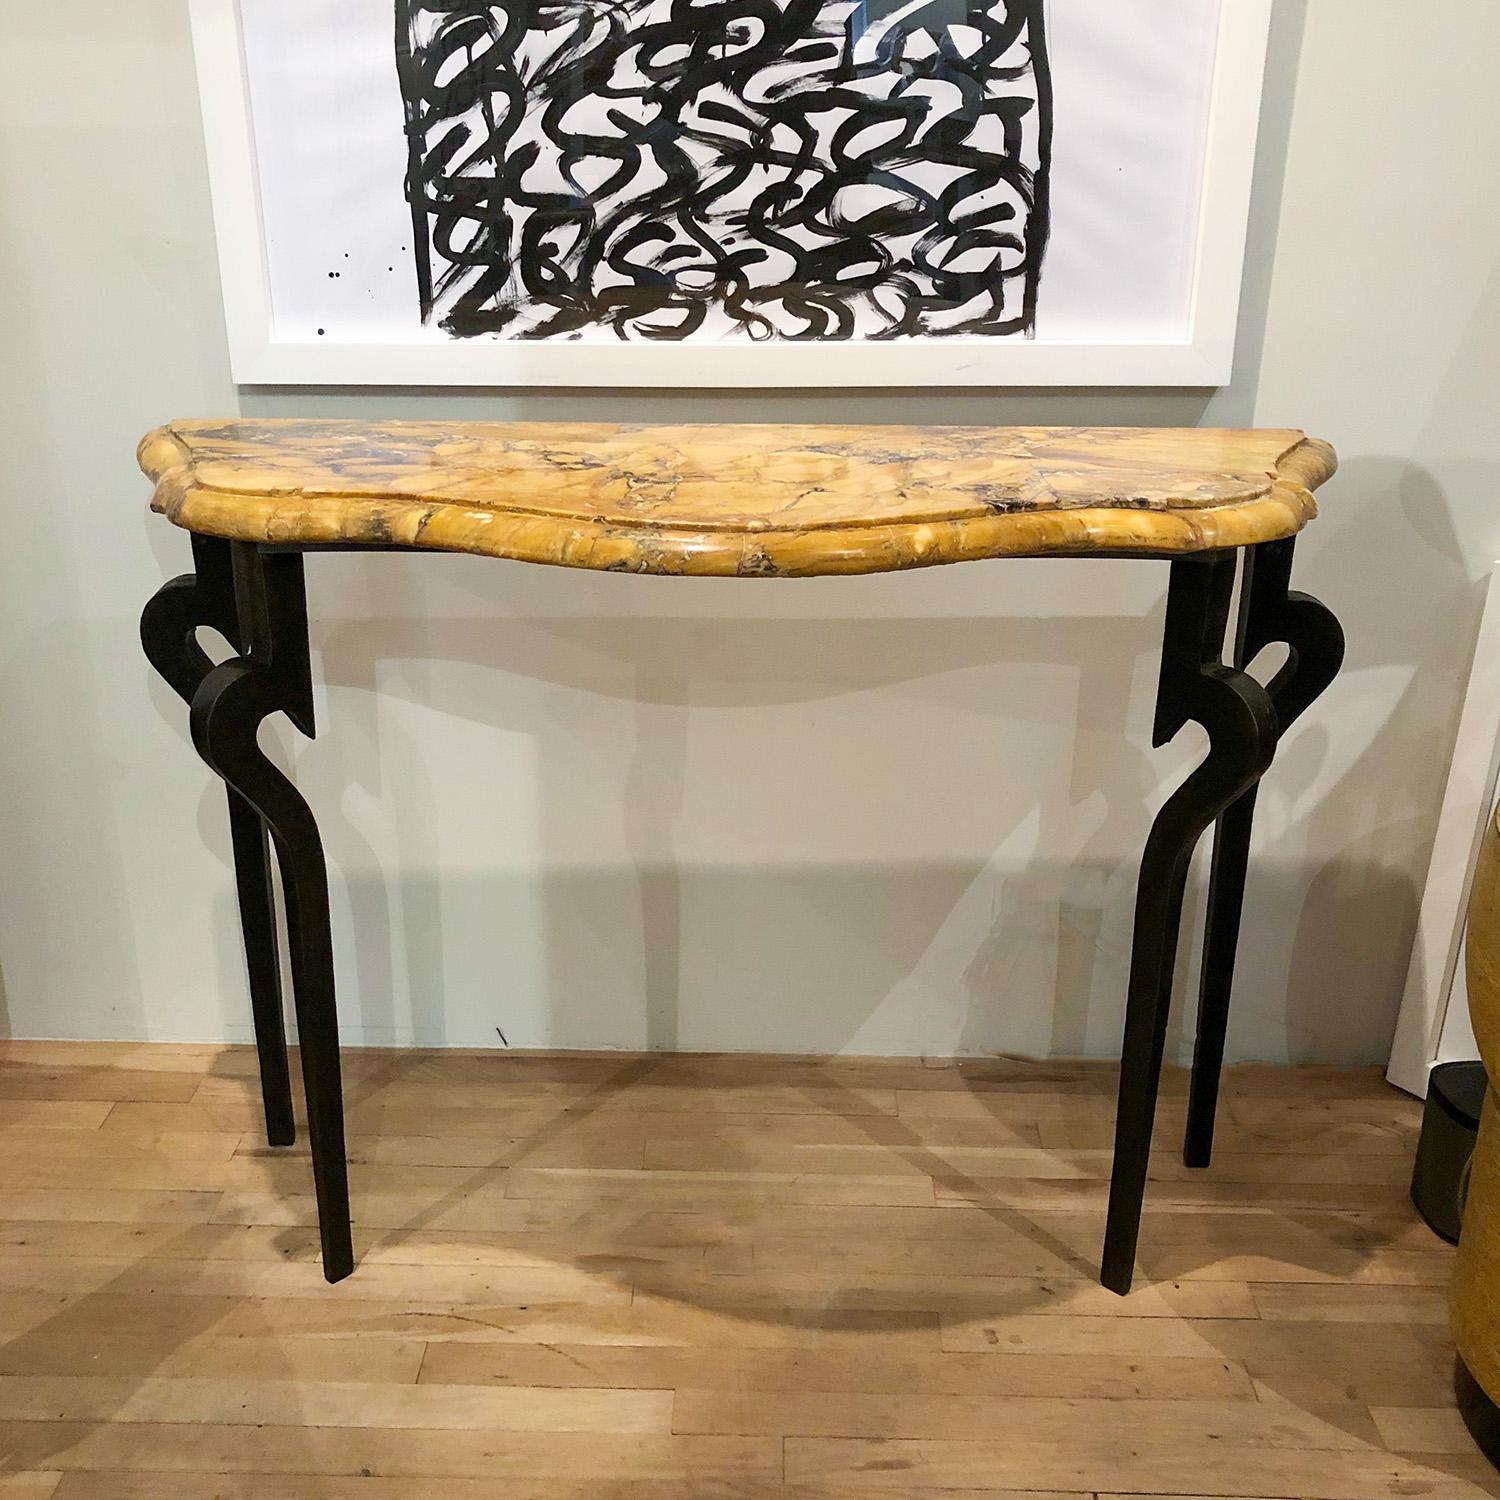 Cast iron console table with sienna marble top
Top circa 1750; base contemporary
Measures: Height 33 ¼ in, width 48 ¼ in, depth 17 in.

[2123E].